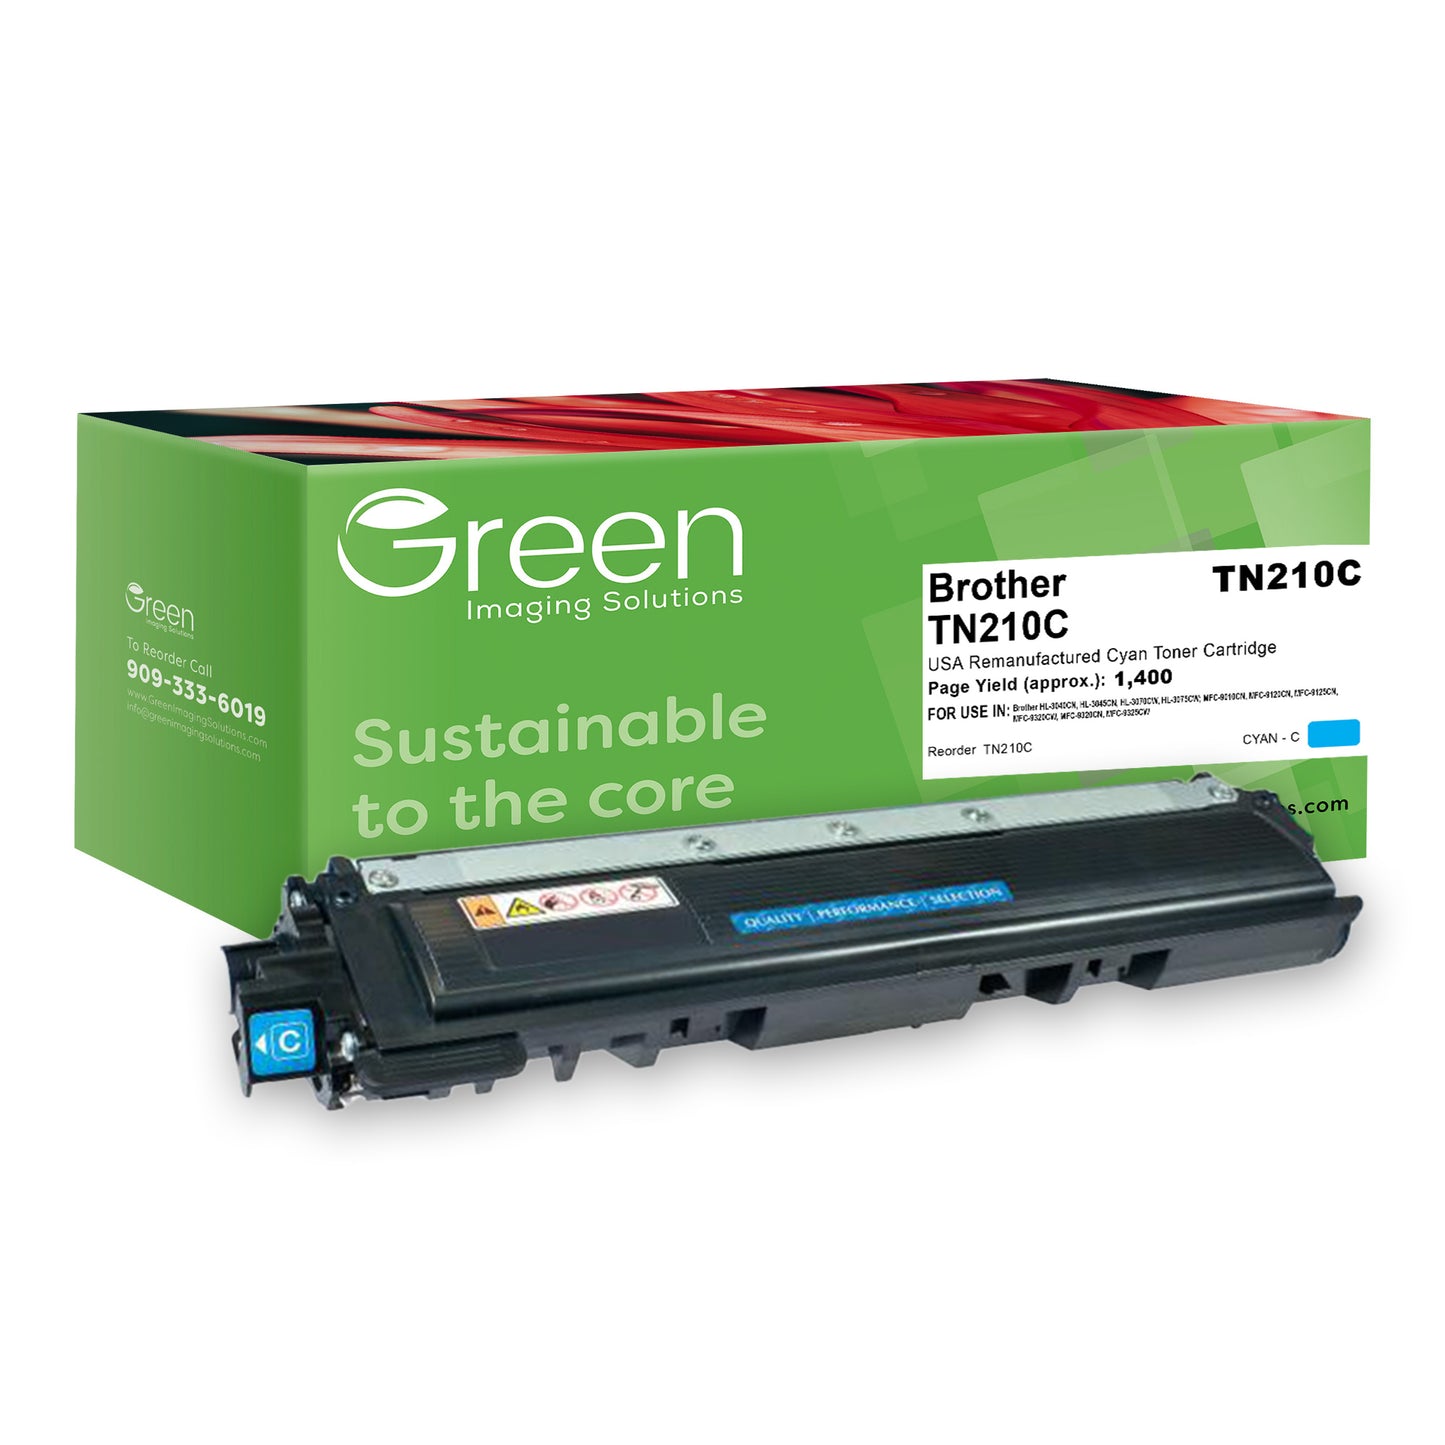 Green Imaging Solutions USA Remanufactured Cyan Toner Cartridge for Brother TN210